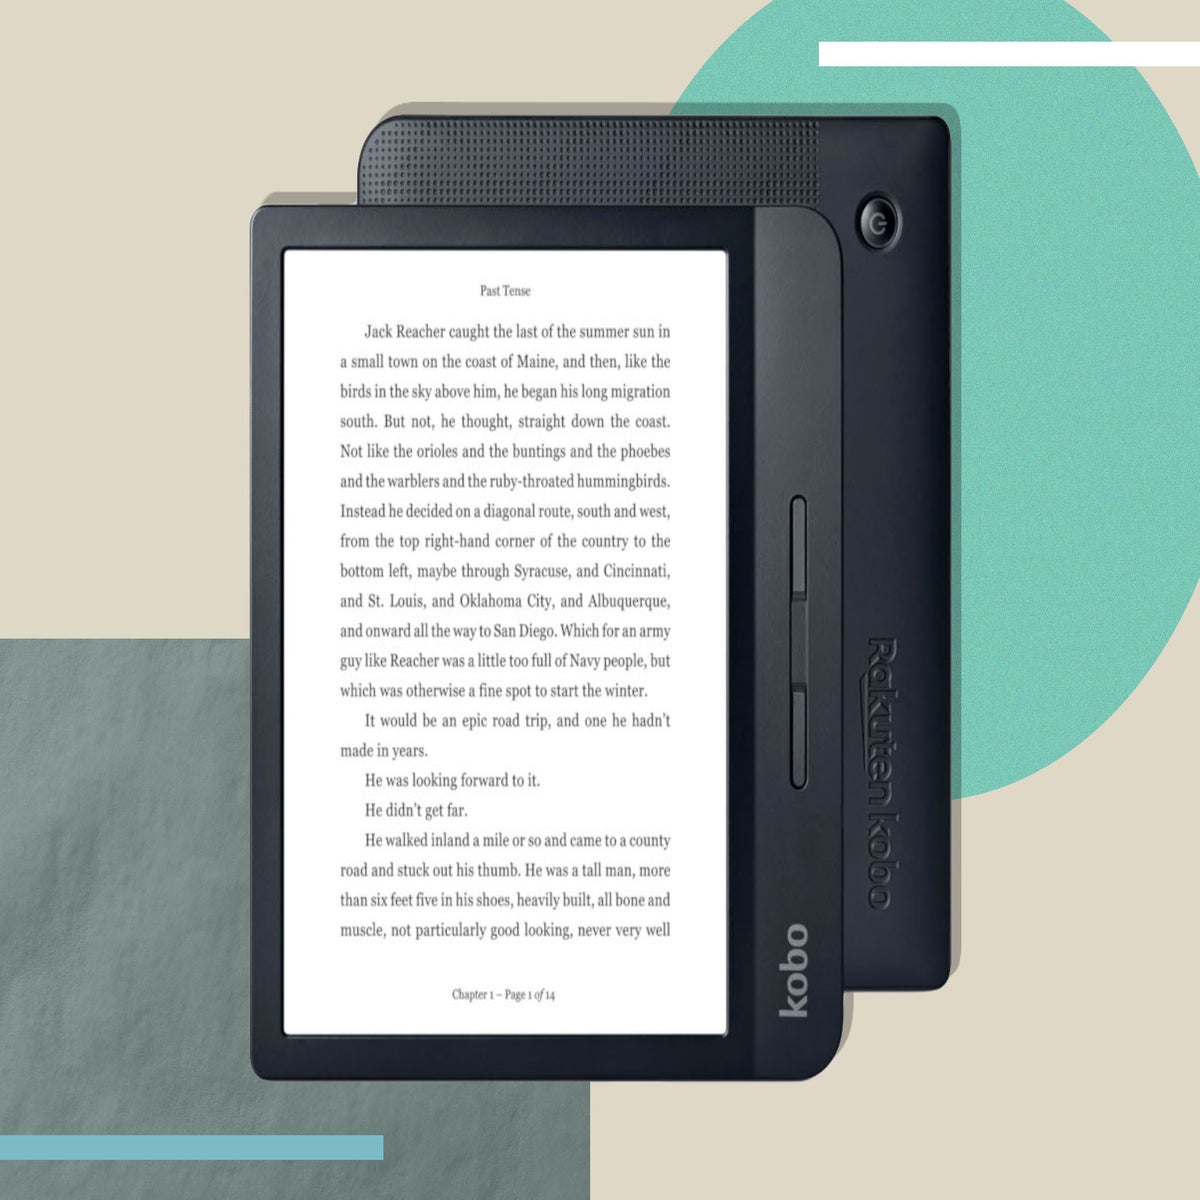 Kobo Libra H2O: Liberated from ? – Six Colors